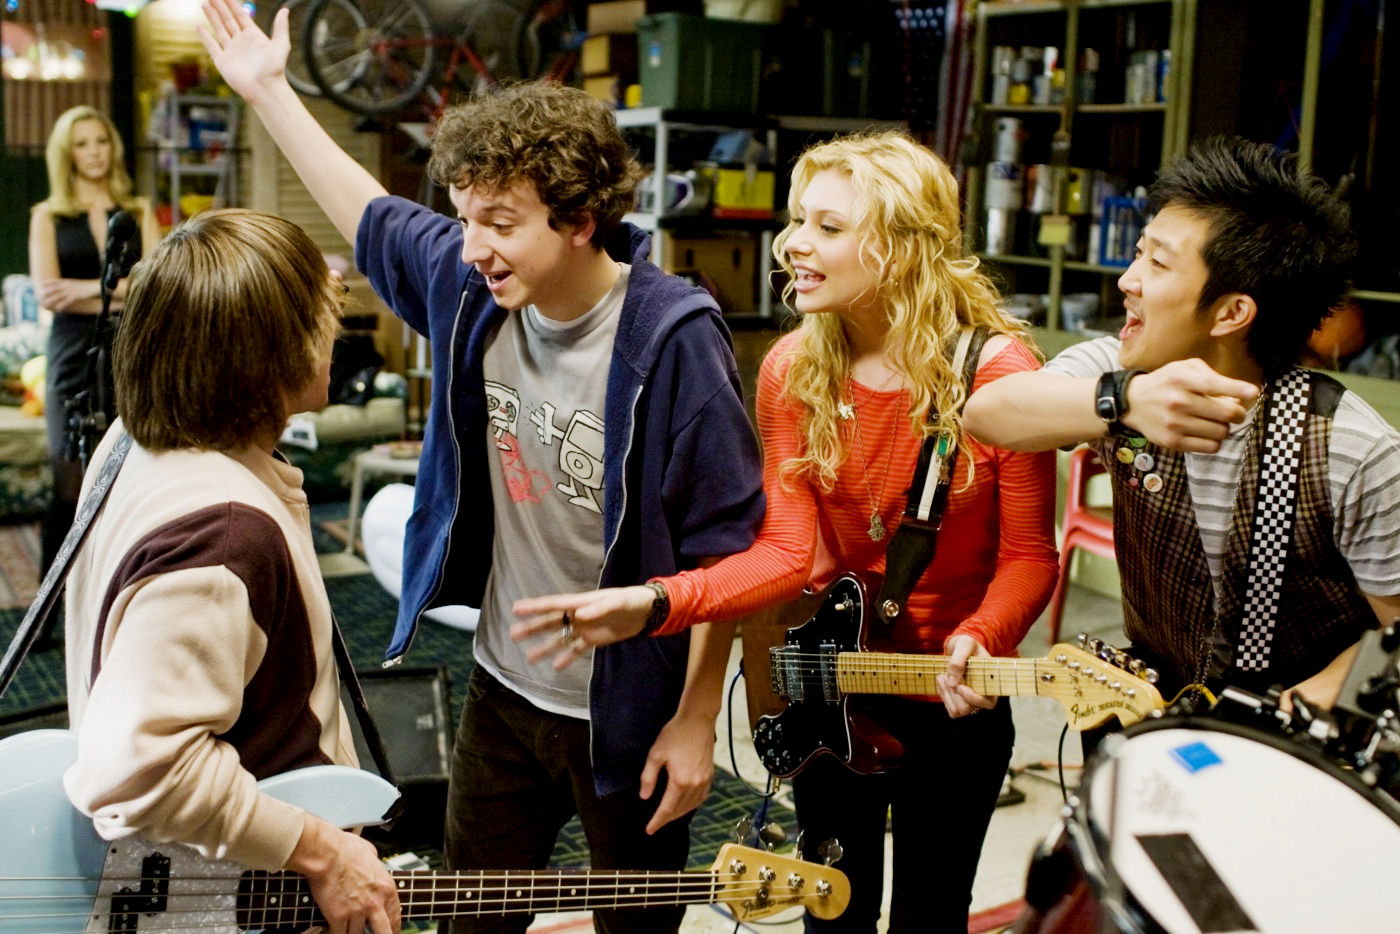 Charlie Saxton, Gaelan Connell, Alyson Michalka and Tim Jo in Summit Entertainment's Bandslam (2009). Photo credit by Van Redin.